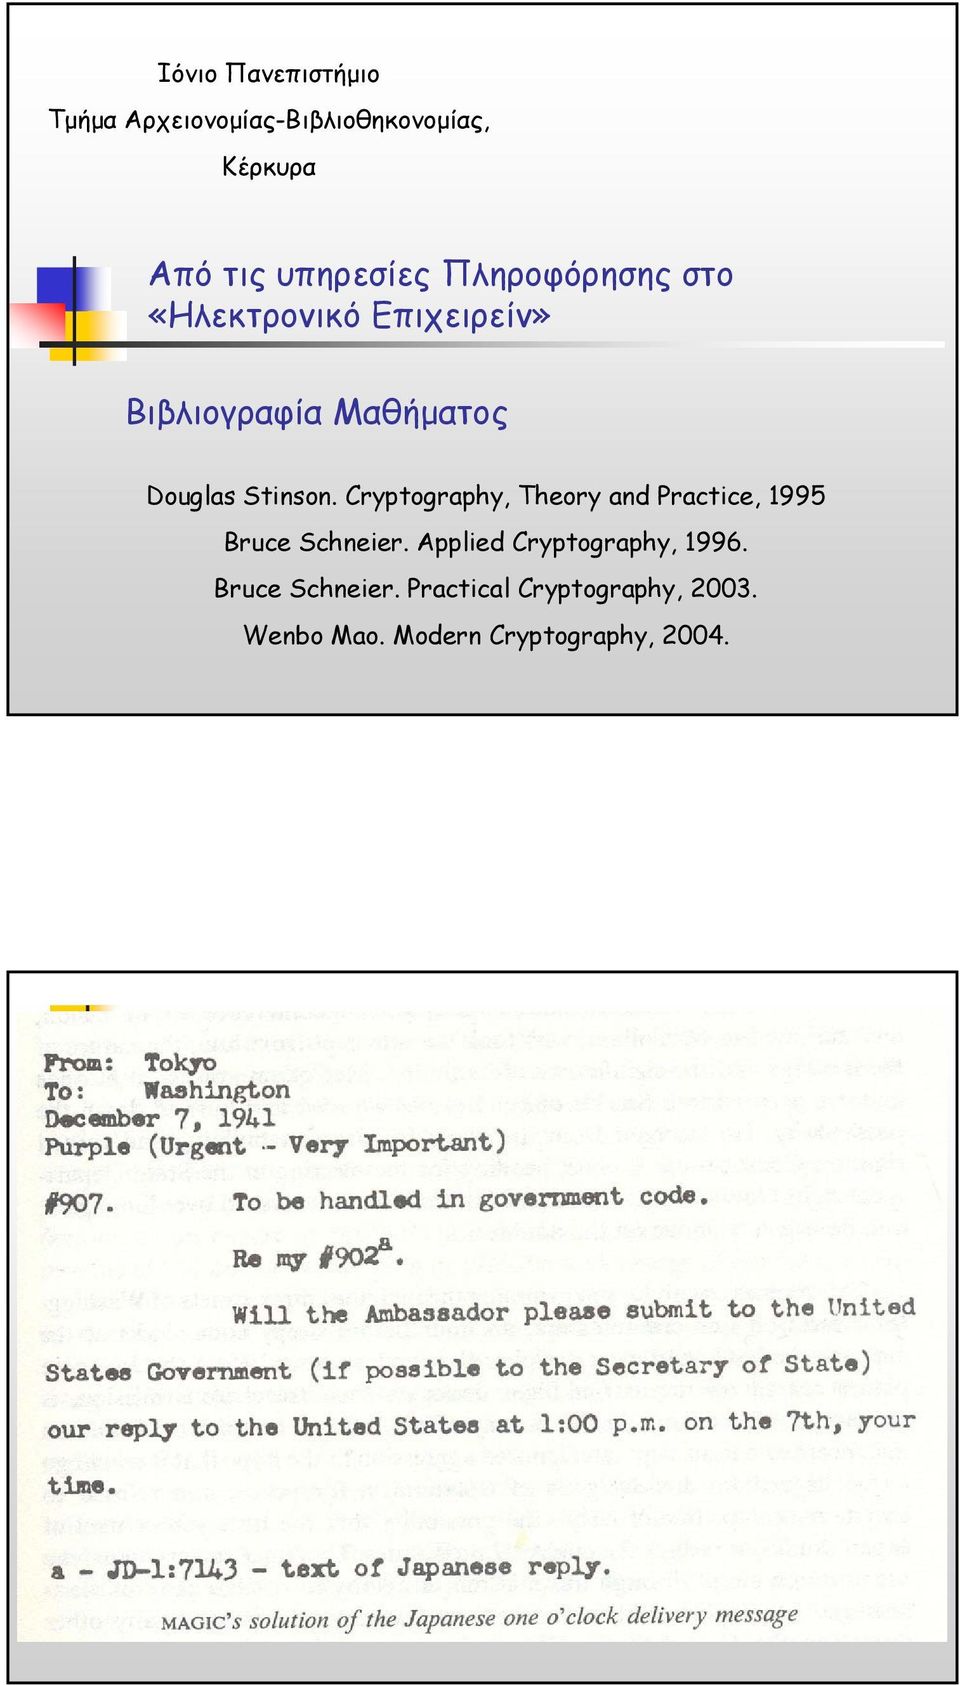 Cryptography, Theory and Practice, 1995 Bruce Schneier. Applied Cryptography, 1996.